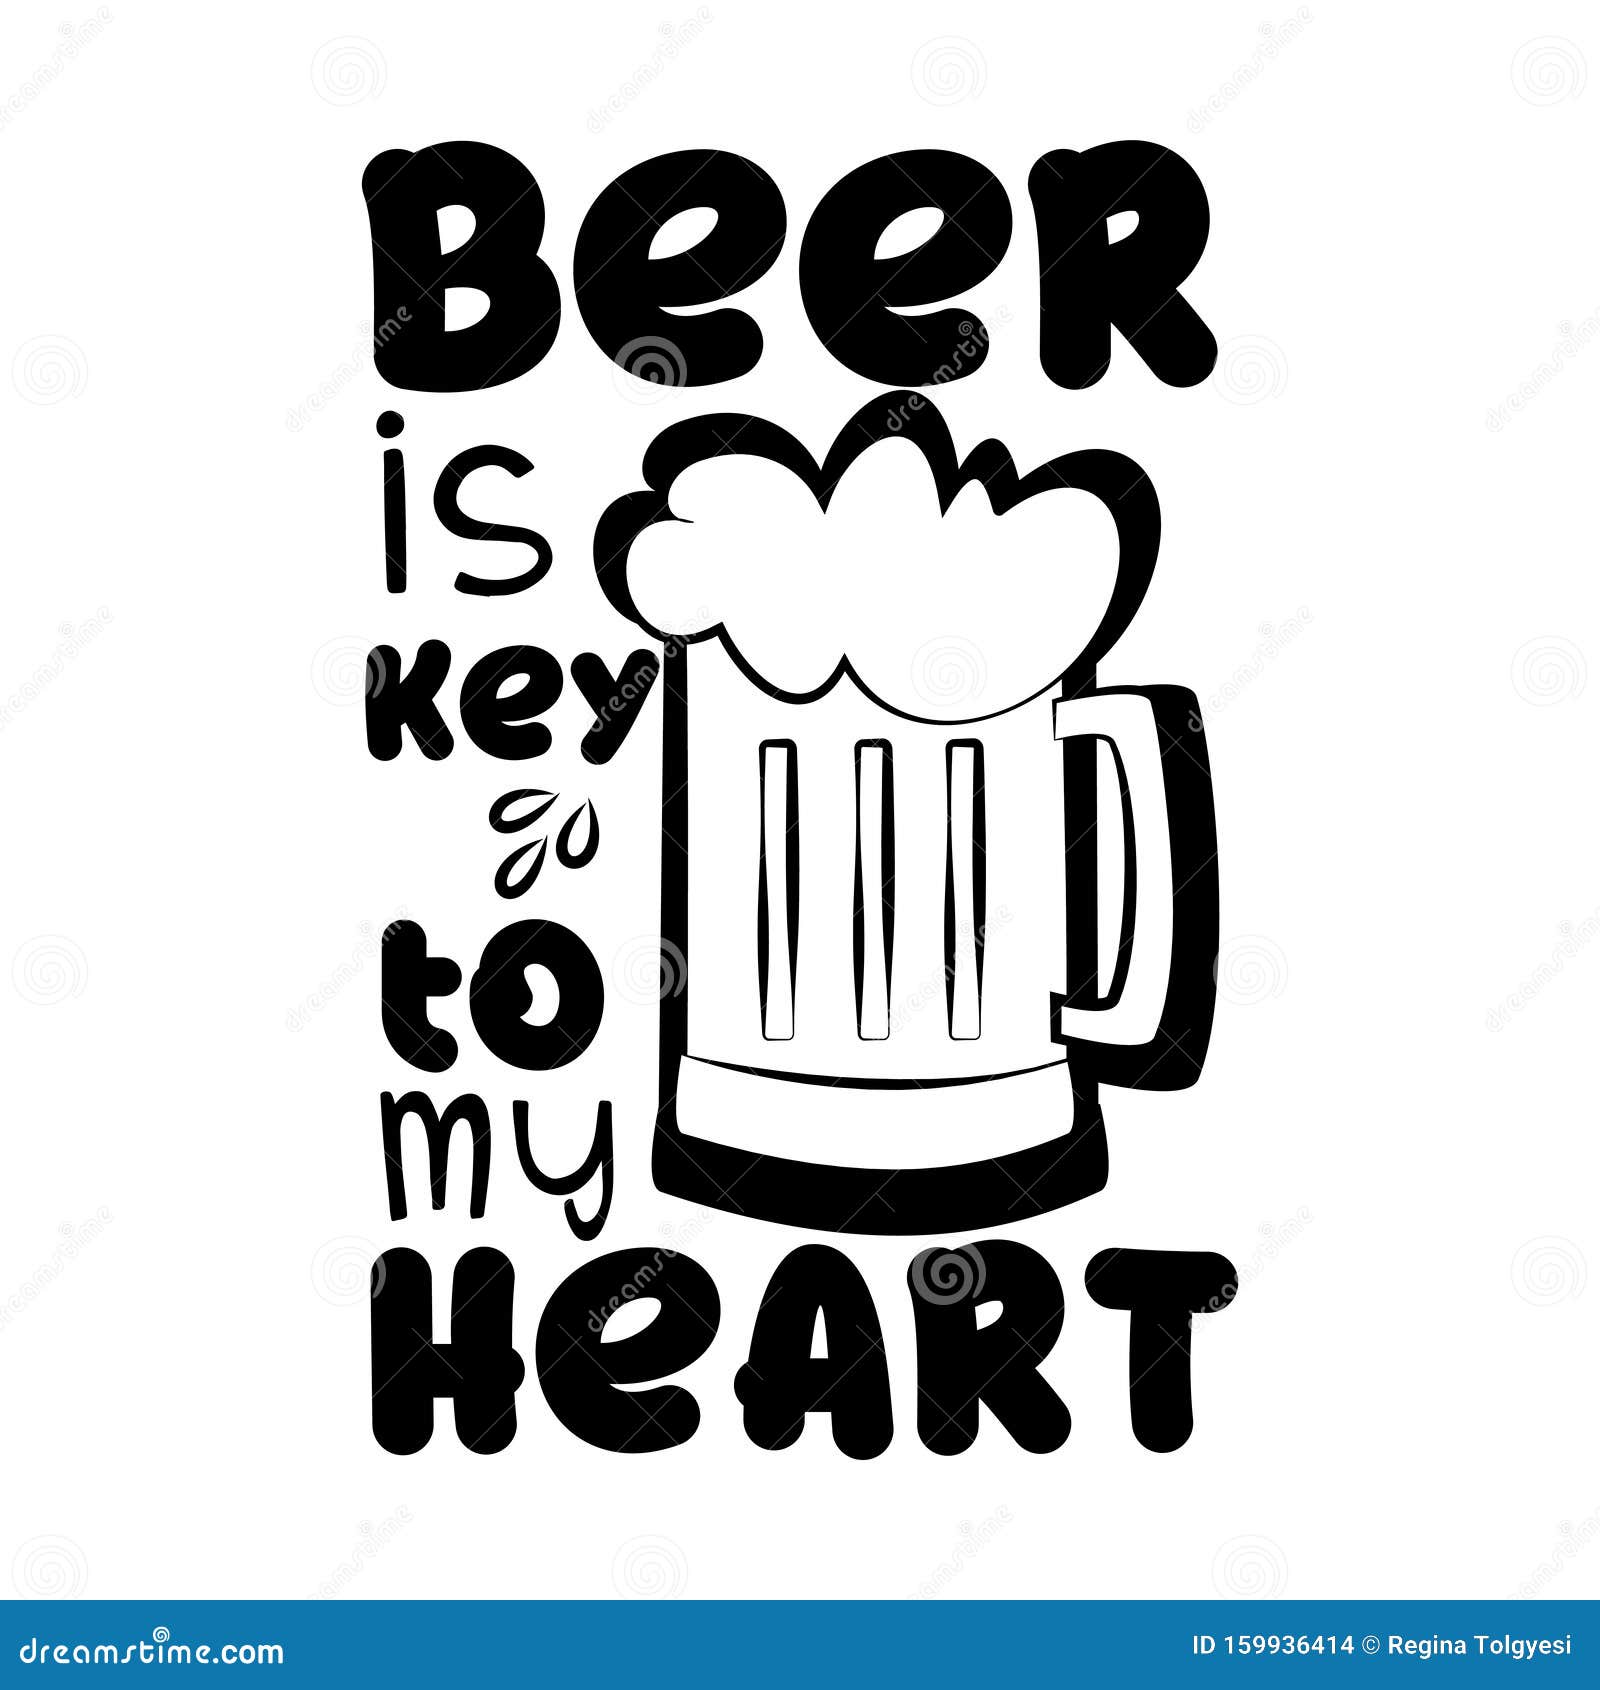 Beer is Key To My Heart - Funny Saying Text with Beer Mug, Black and White  Concept. Stock Vector - Illustration of brew, brewery: 159936414